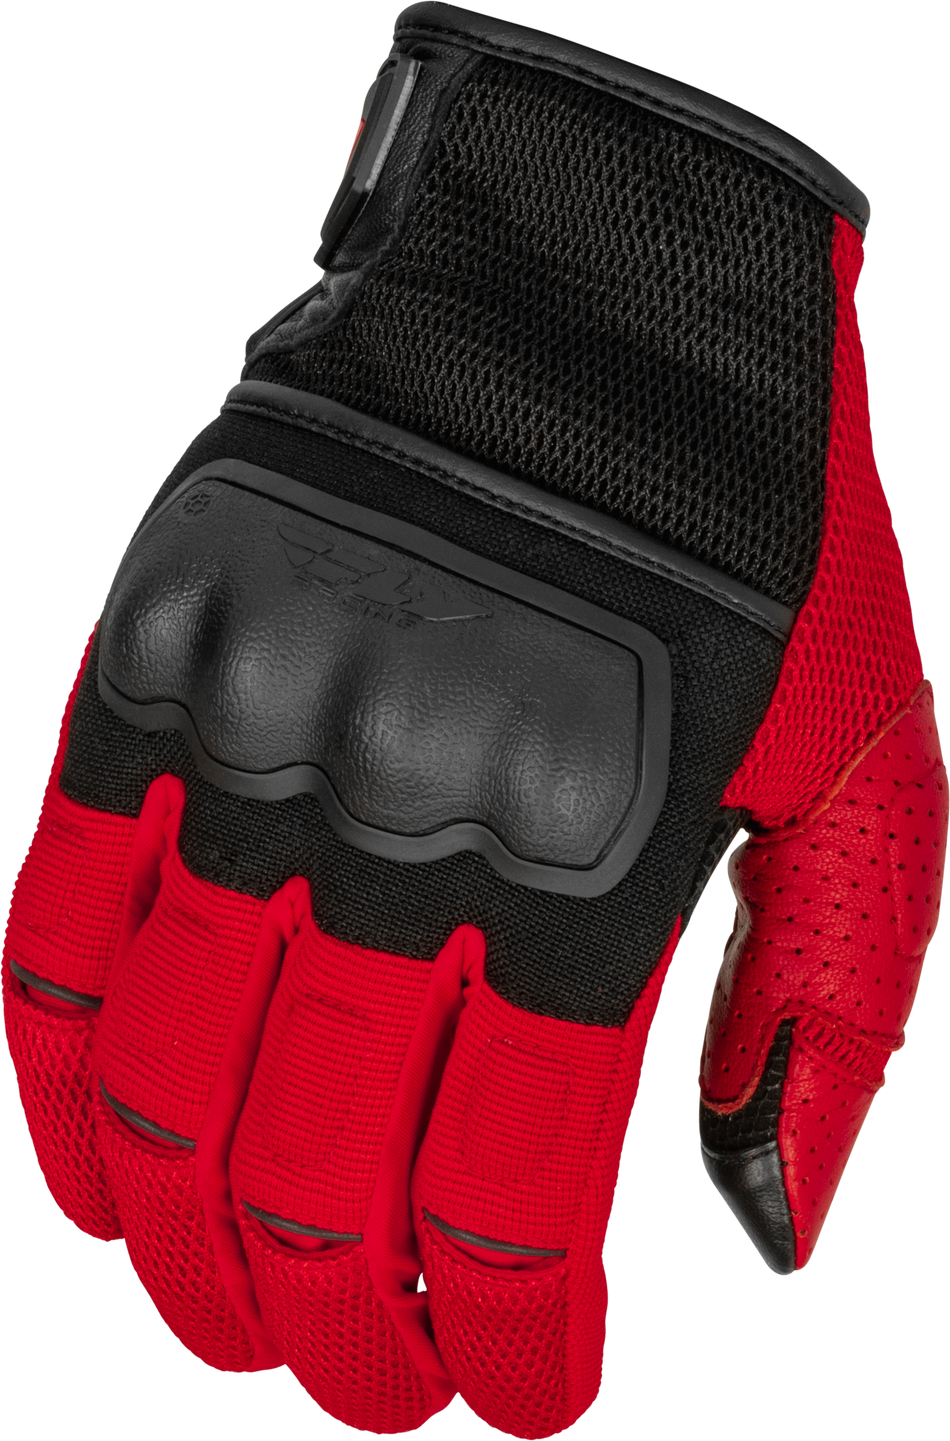 FLY RACING Coolpro Force Gloves Black/Red Md 476-4129M